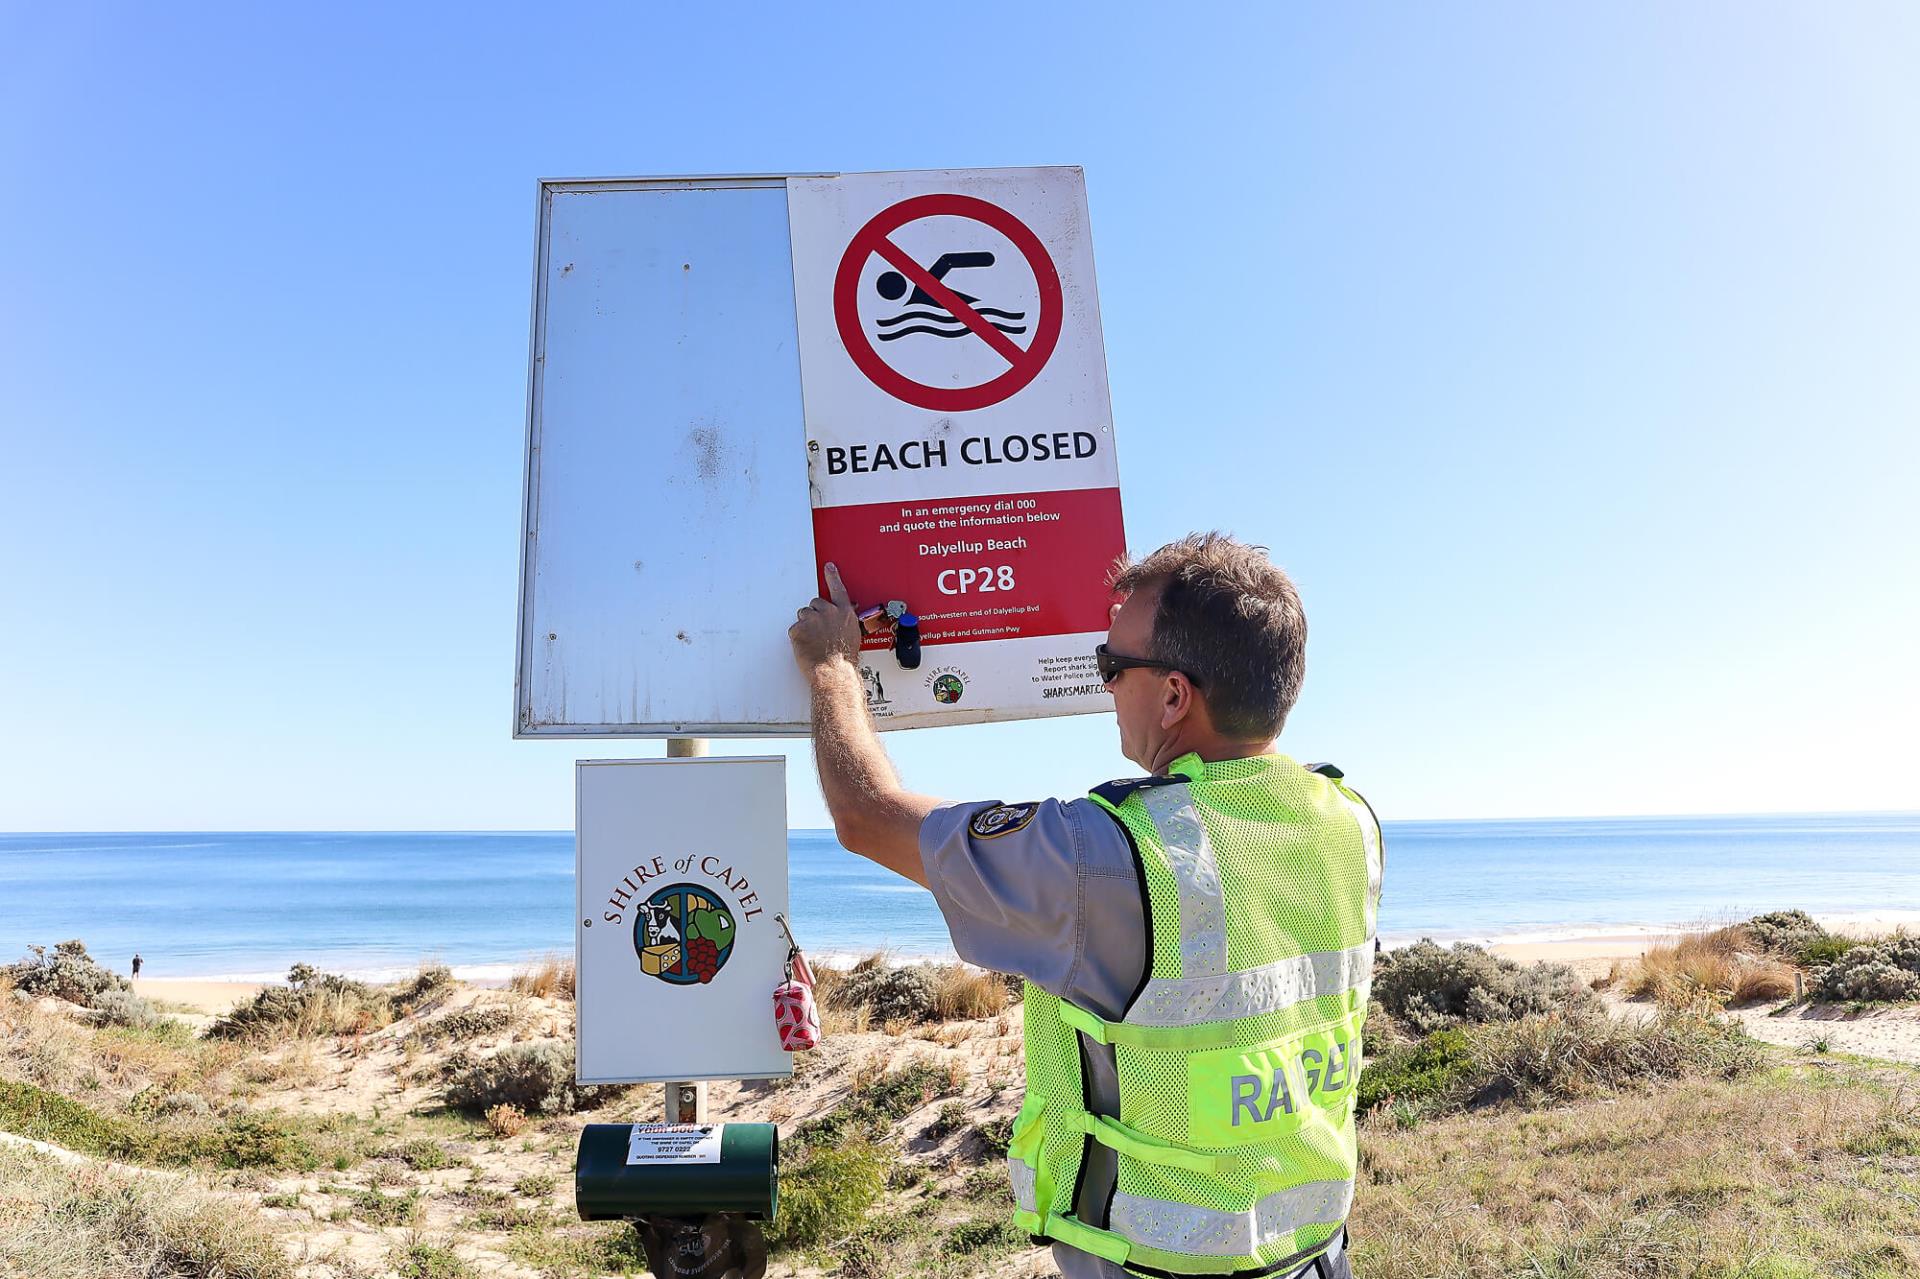 Ranger changing beach safety signs at beach